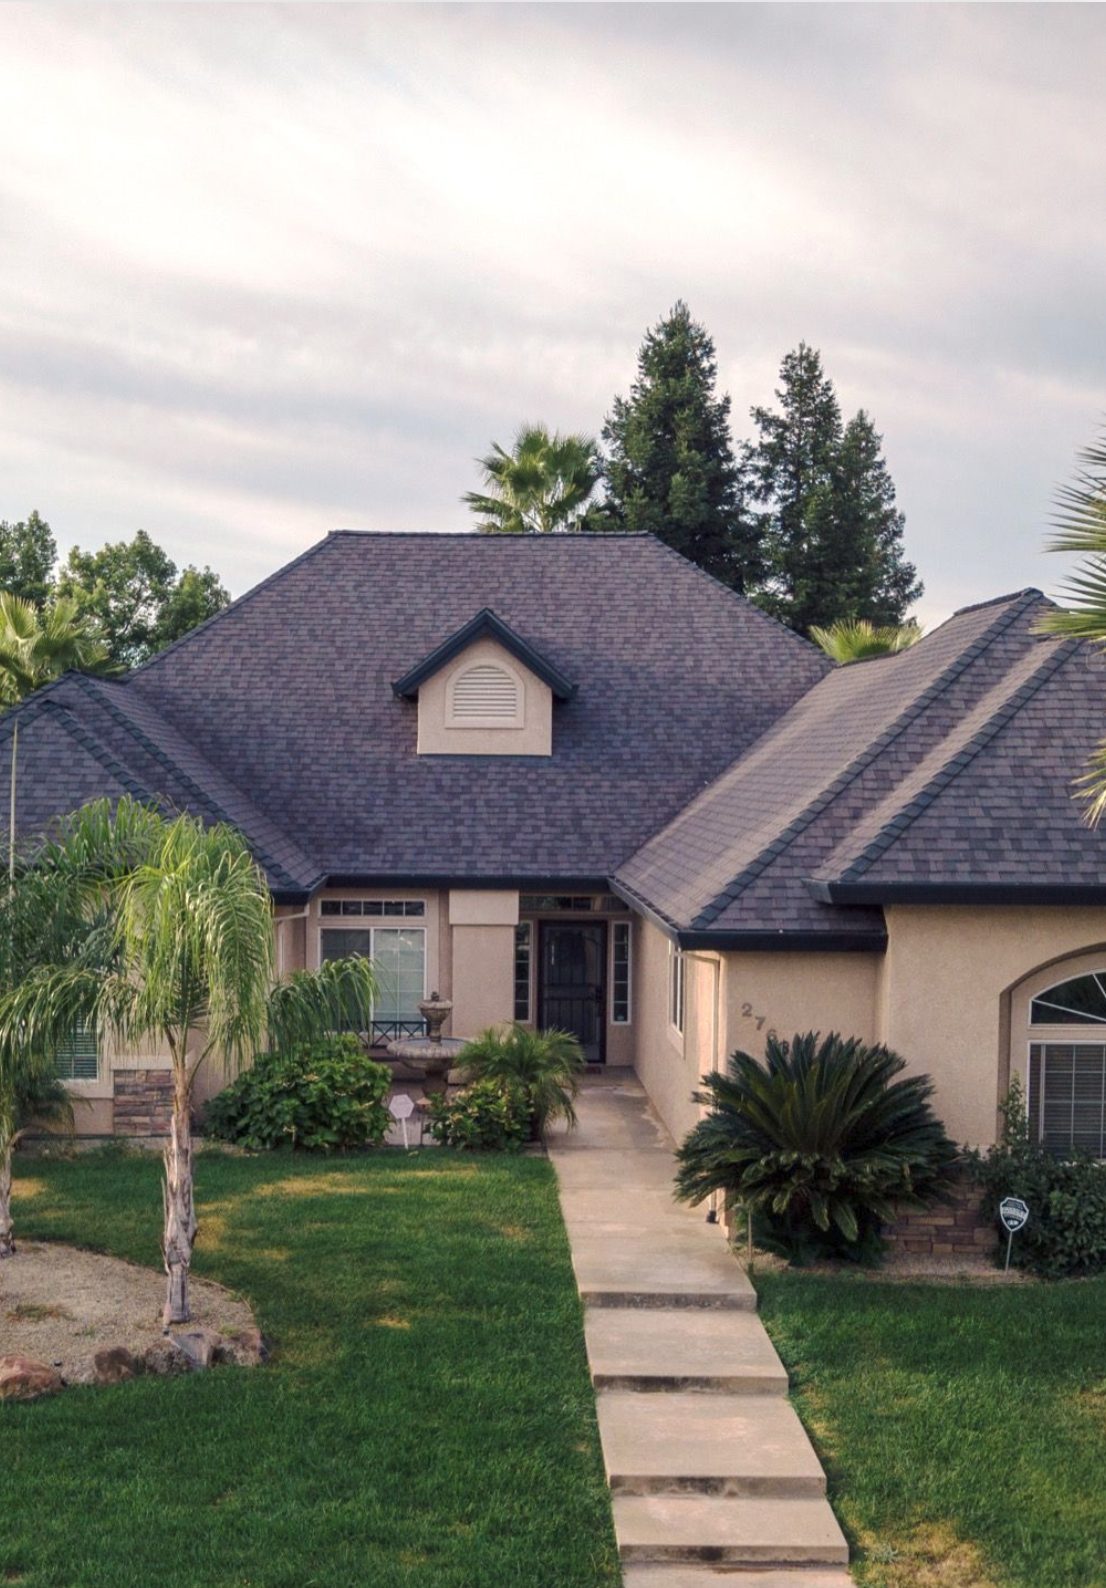  residential roofing services, roofing services